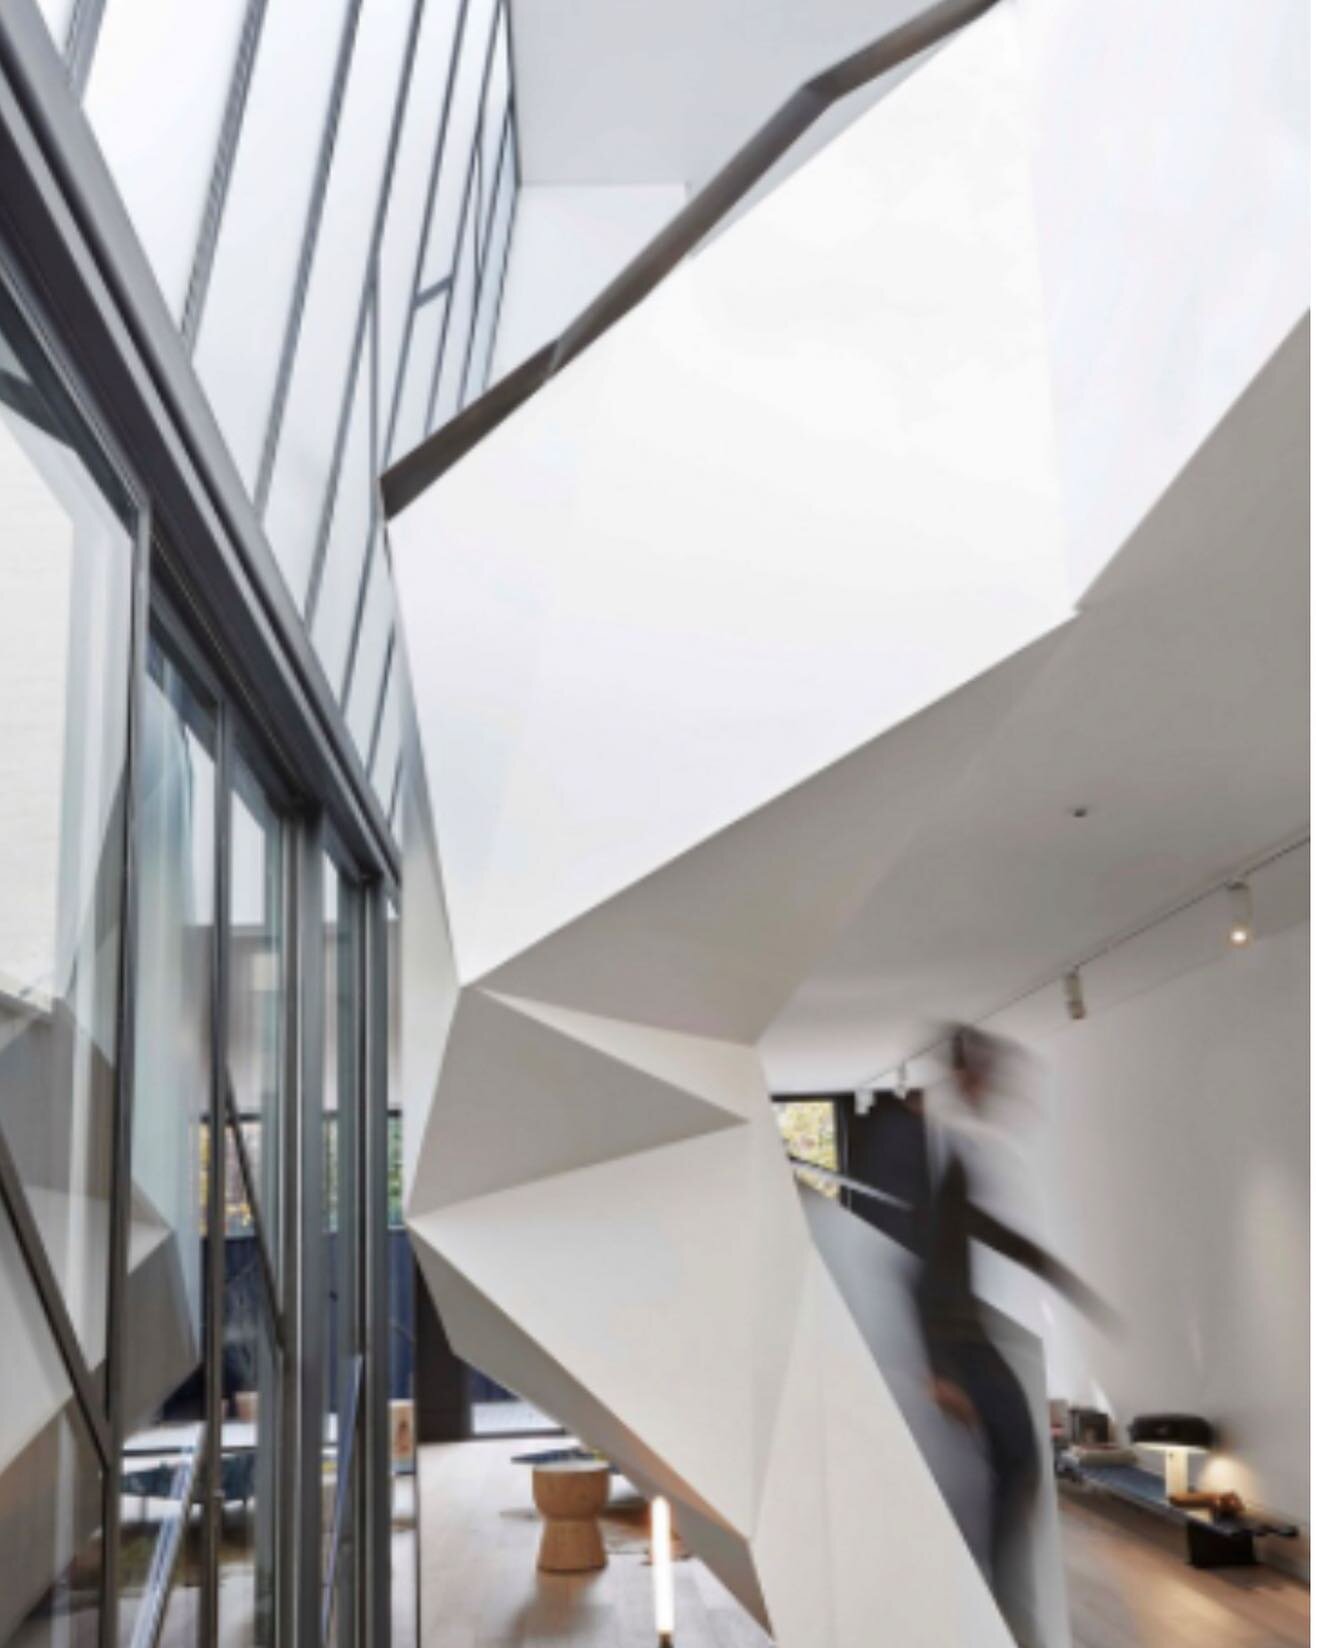 How lucky am I to continually work with amazingly talented  architects who create
STUNNING designs....
this origami-like staircase by multi-award winning Melbourne based architect, Adrian Amore, is folded and welded from steel by @amoreengineers.....